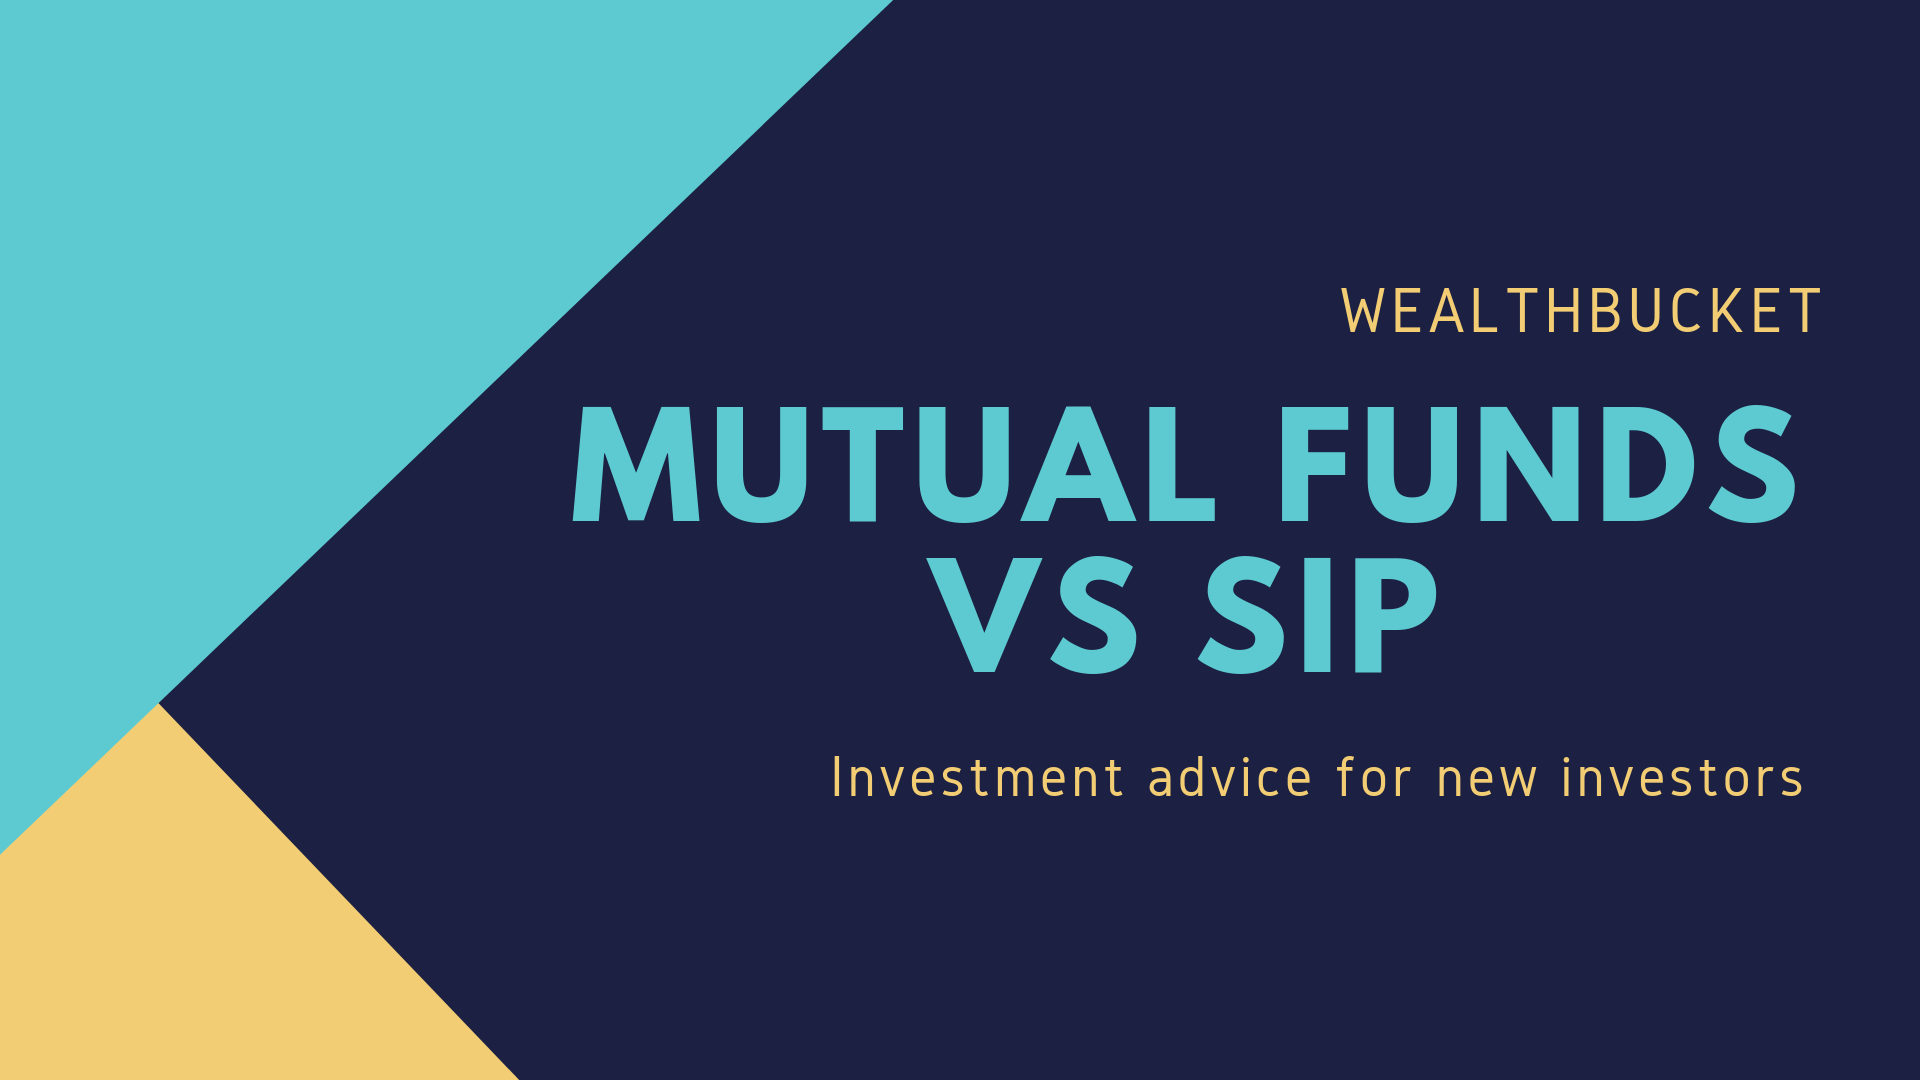 What Is Sip In Mutual Fund?